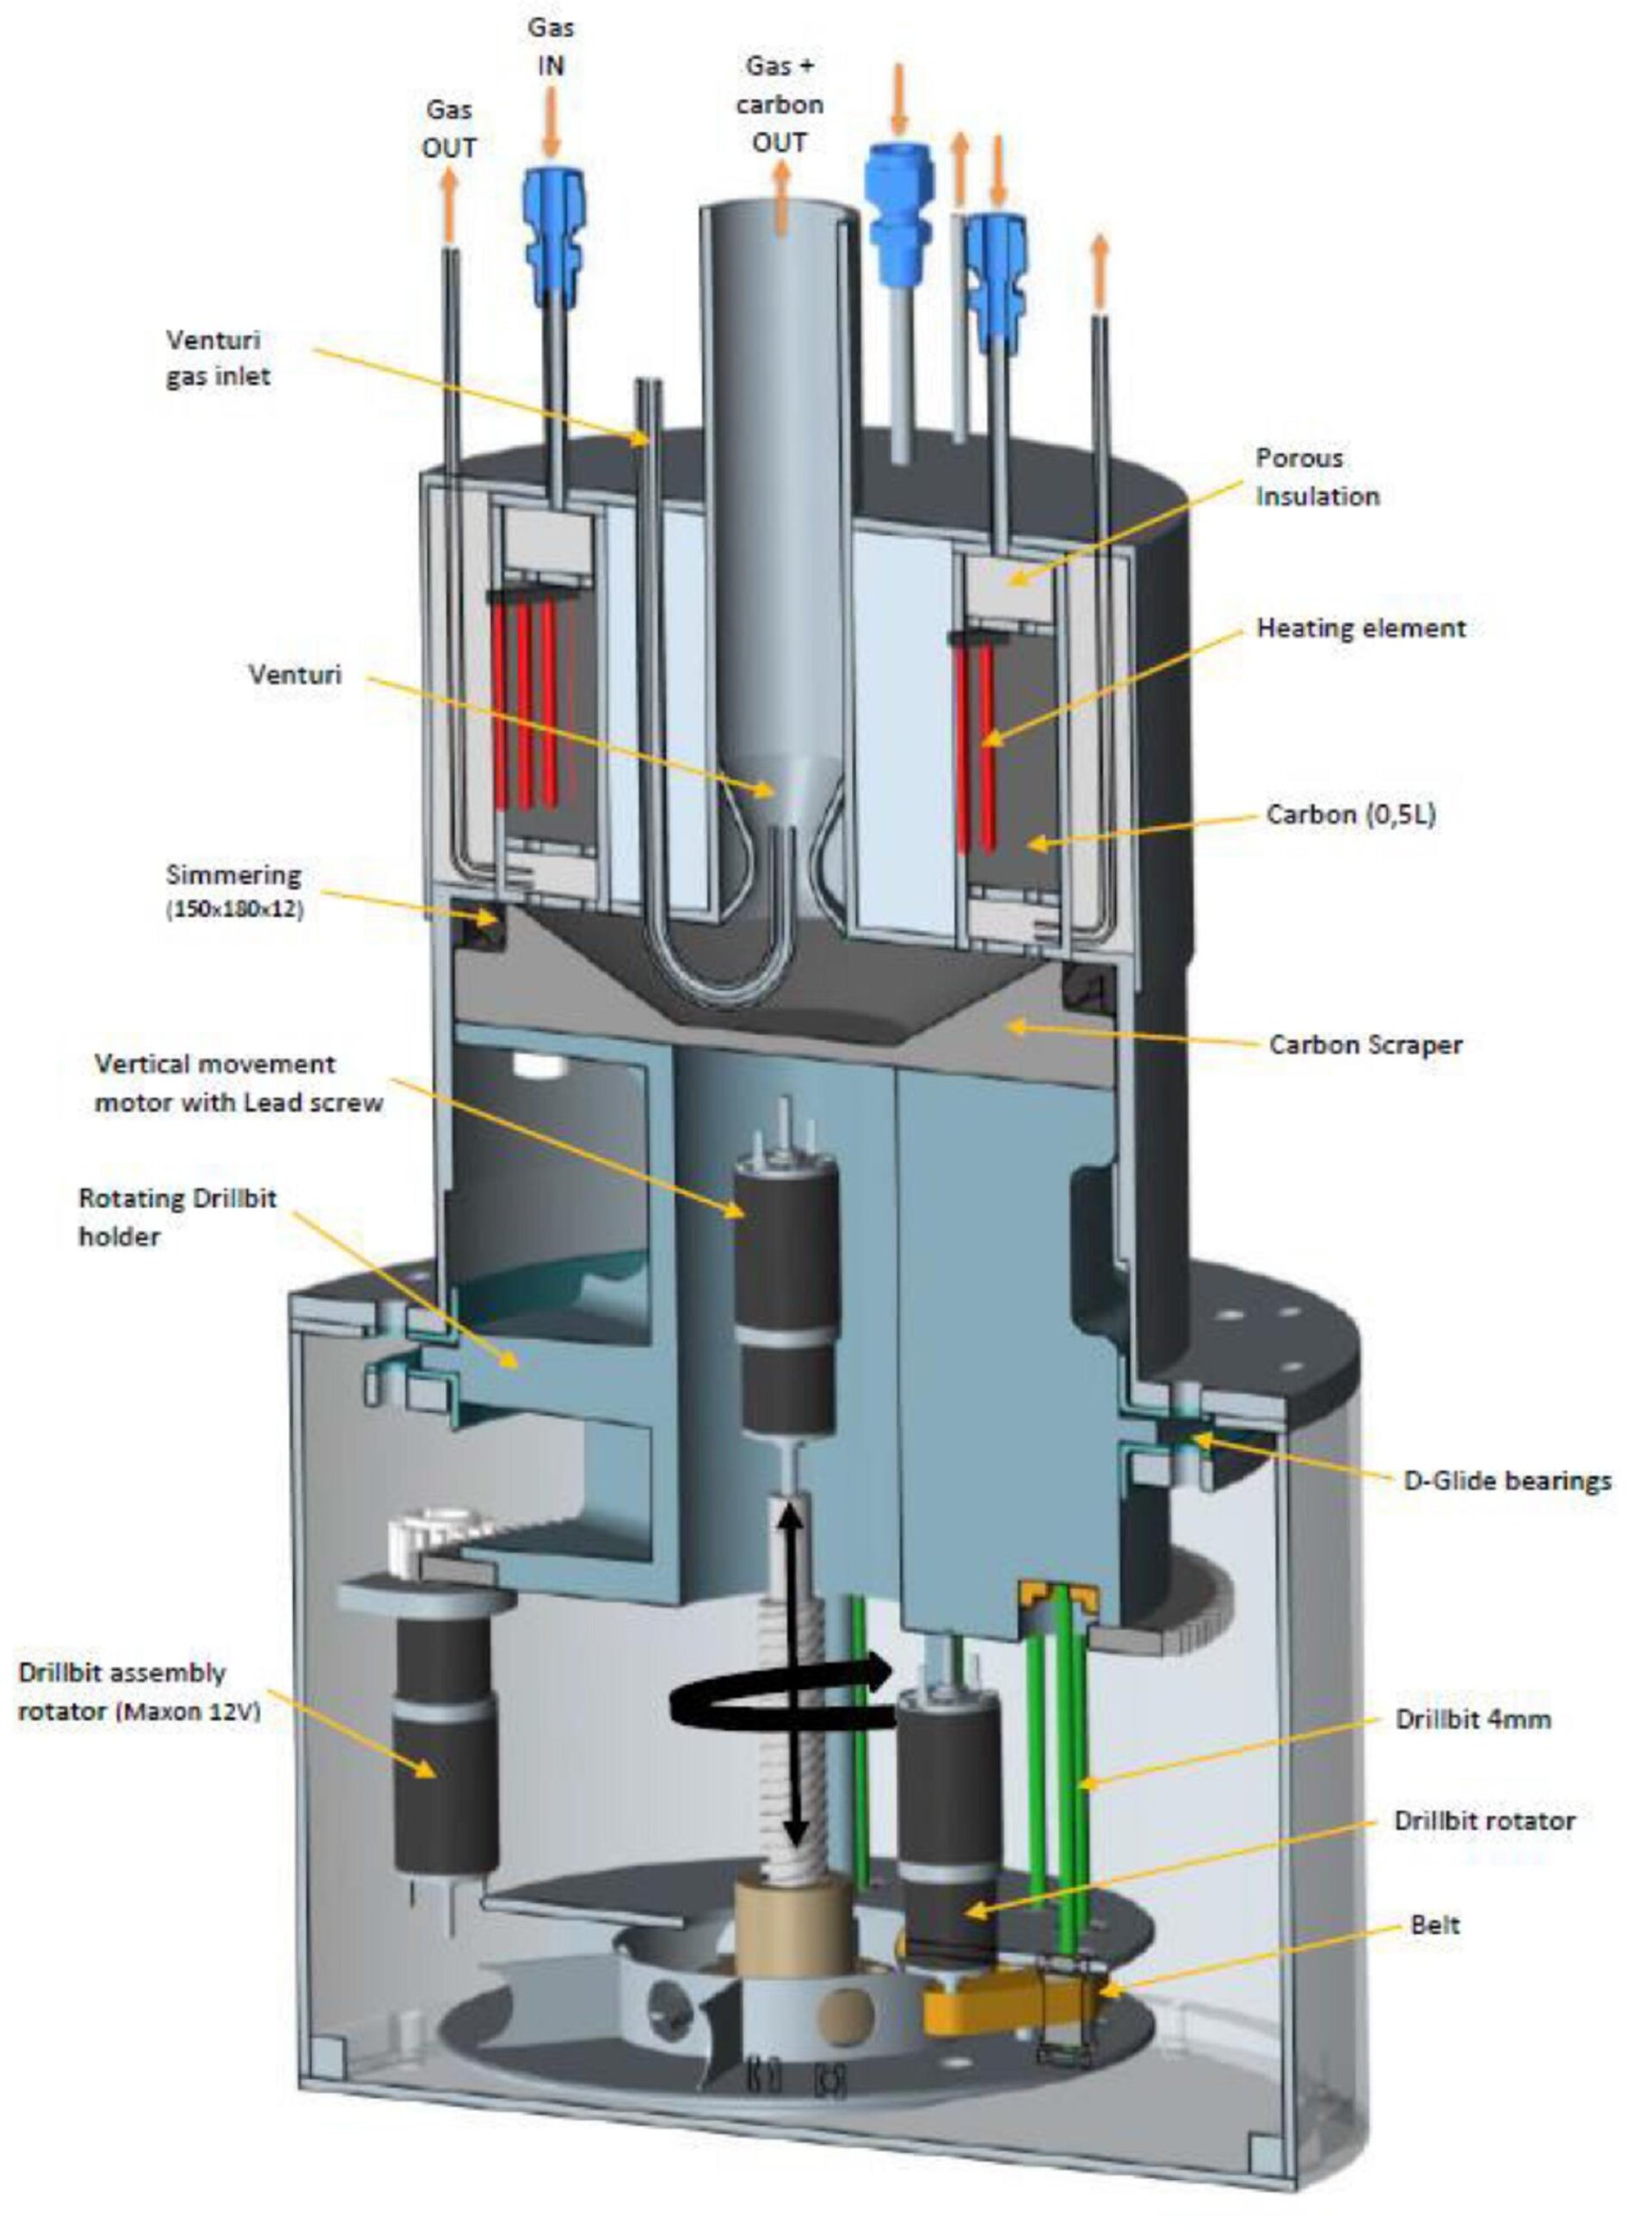 Cross-sectional view of the reactor